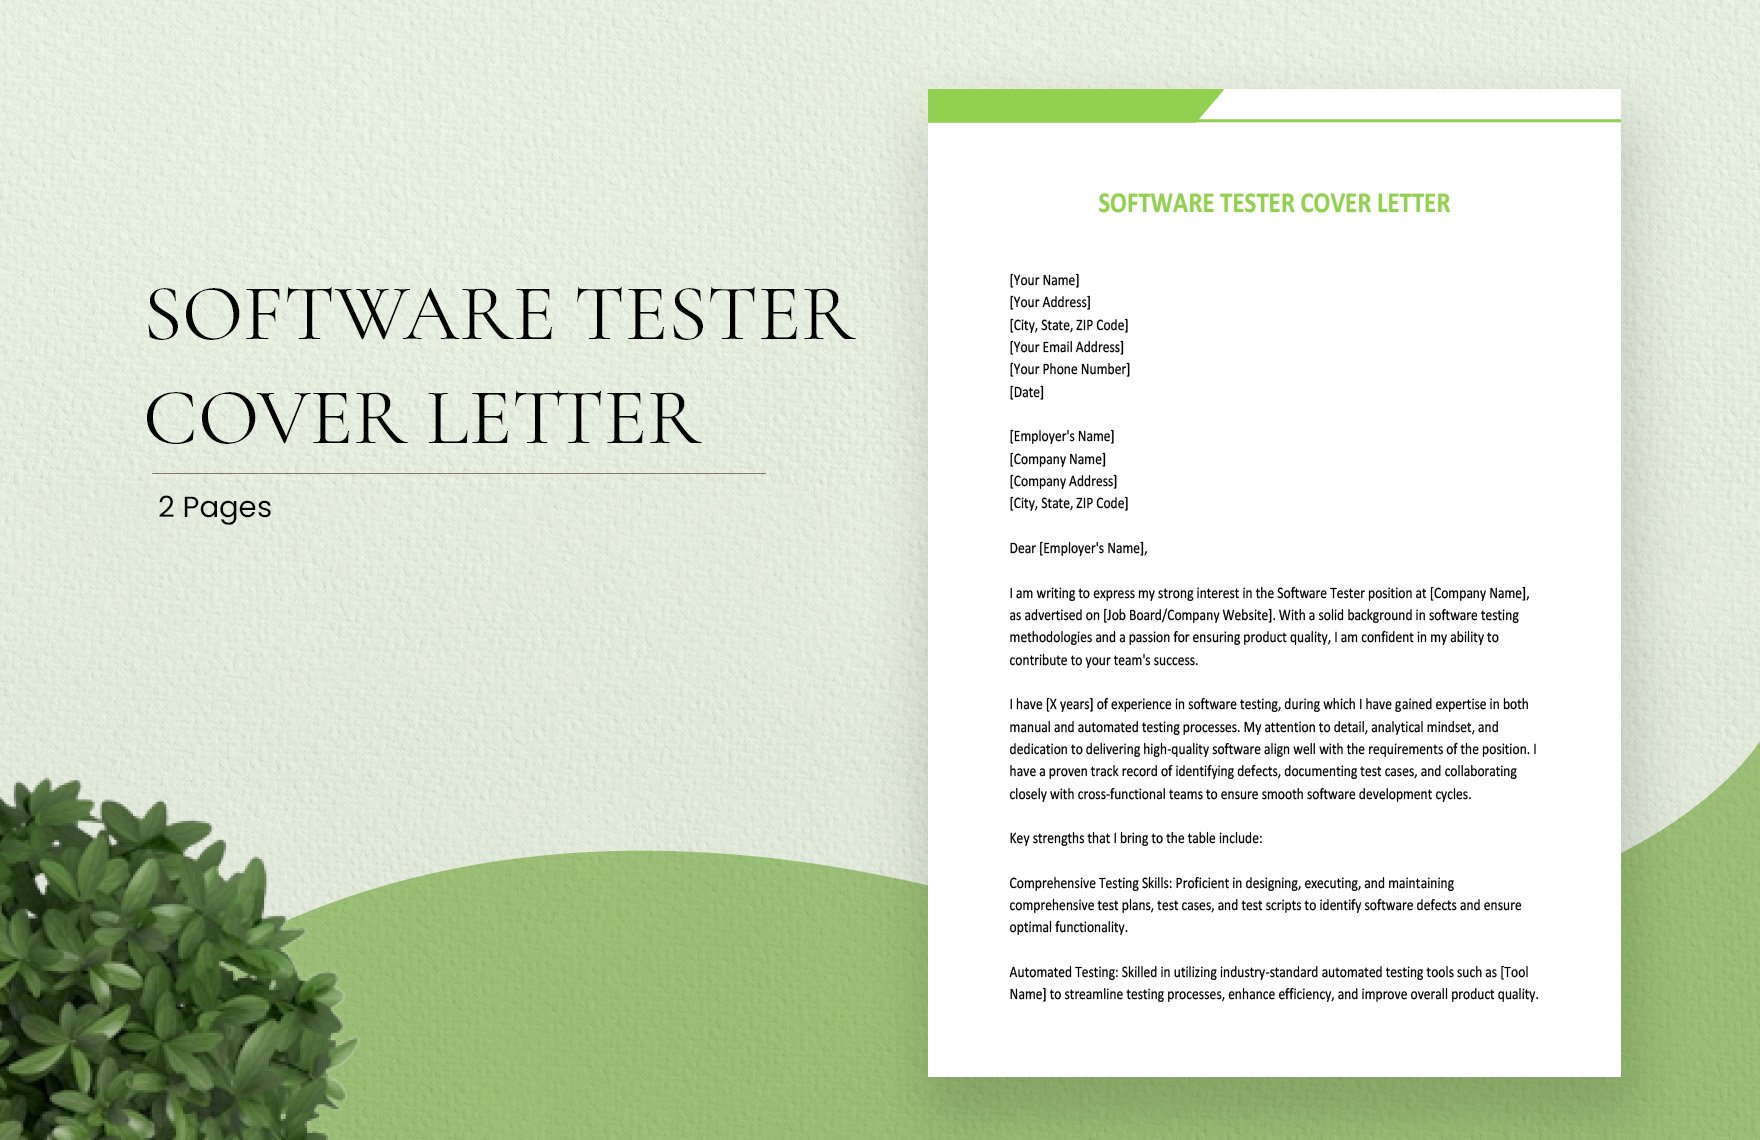 Software Tester Cover Letter in Word, Google Docs